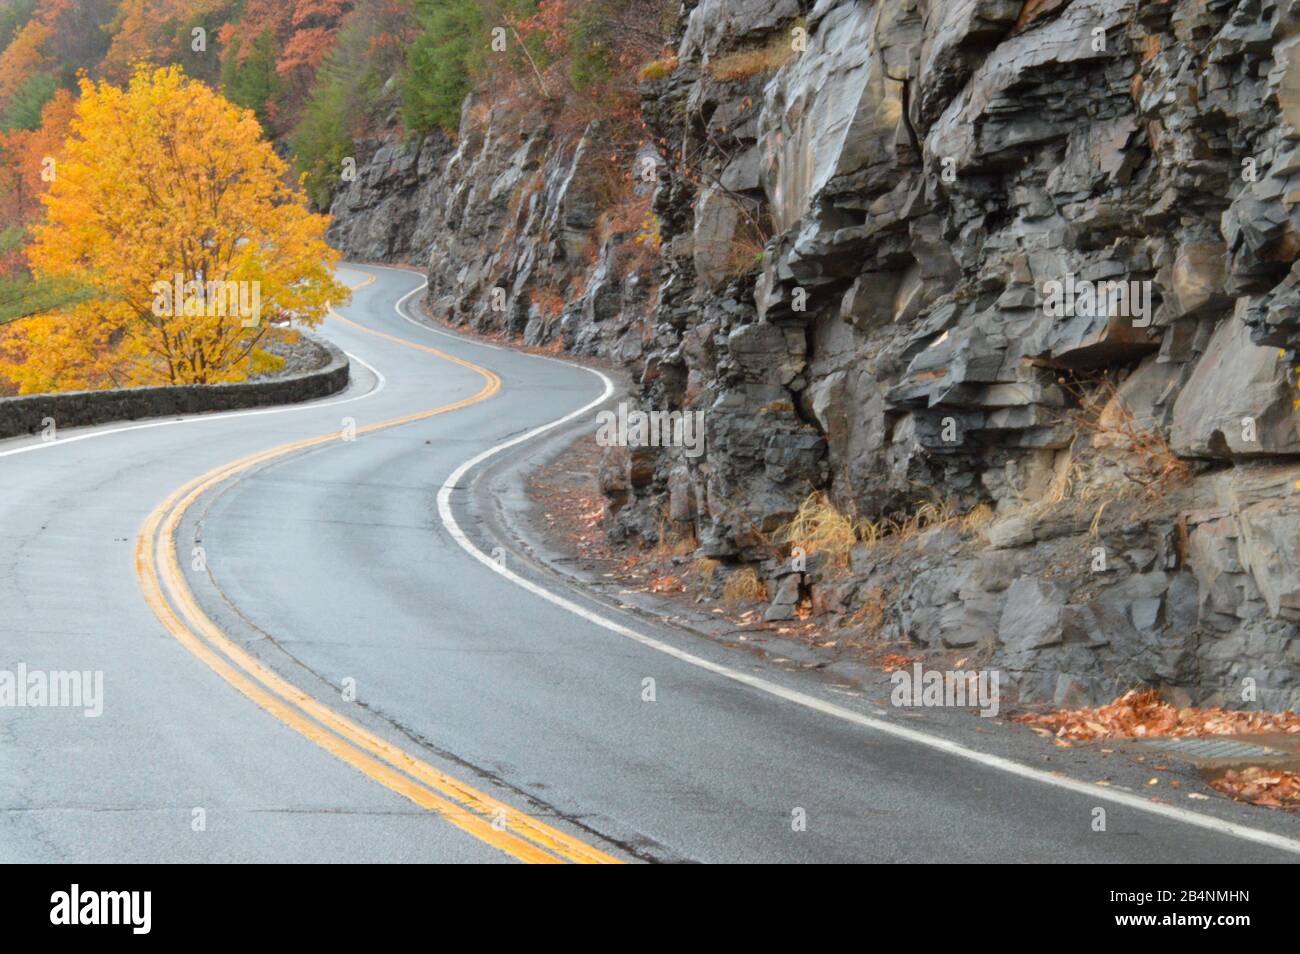 The Hawk's Nest, Port Jervis, New York, winding road and scenic viewpoints in the Delaware River Valley, USA Stock Photo